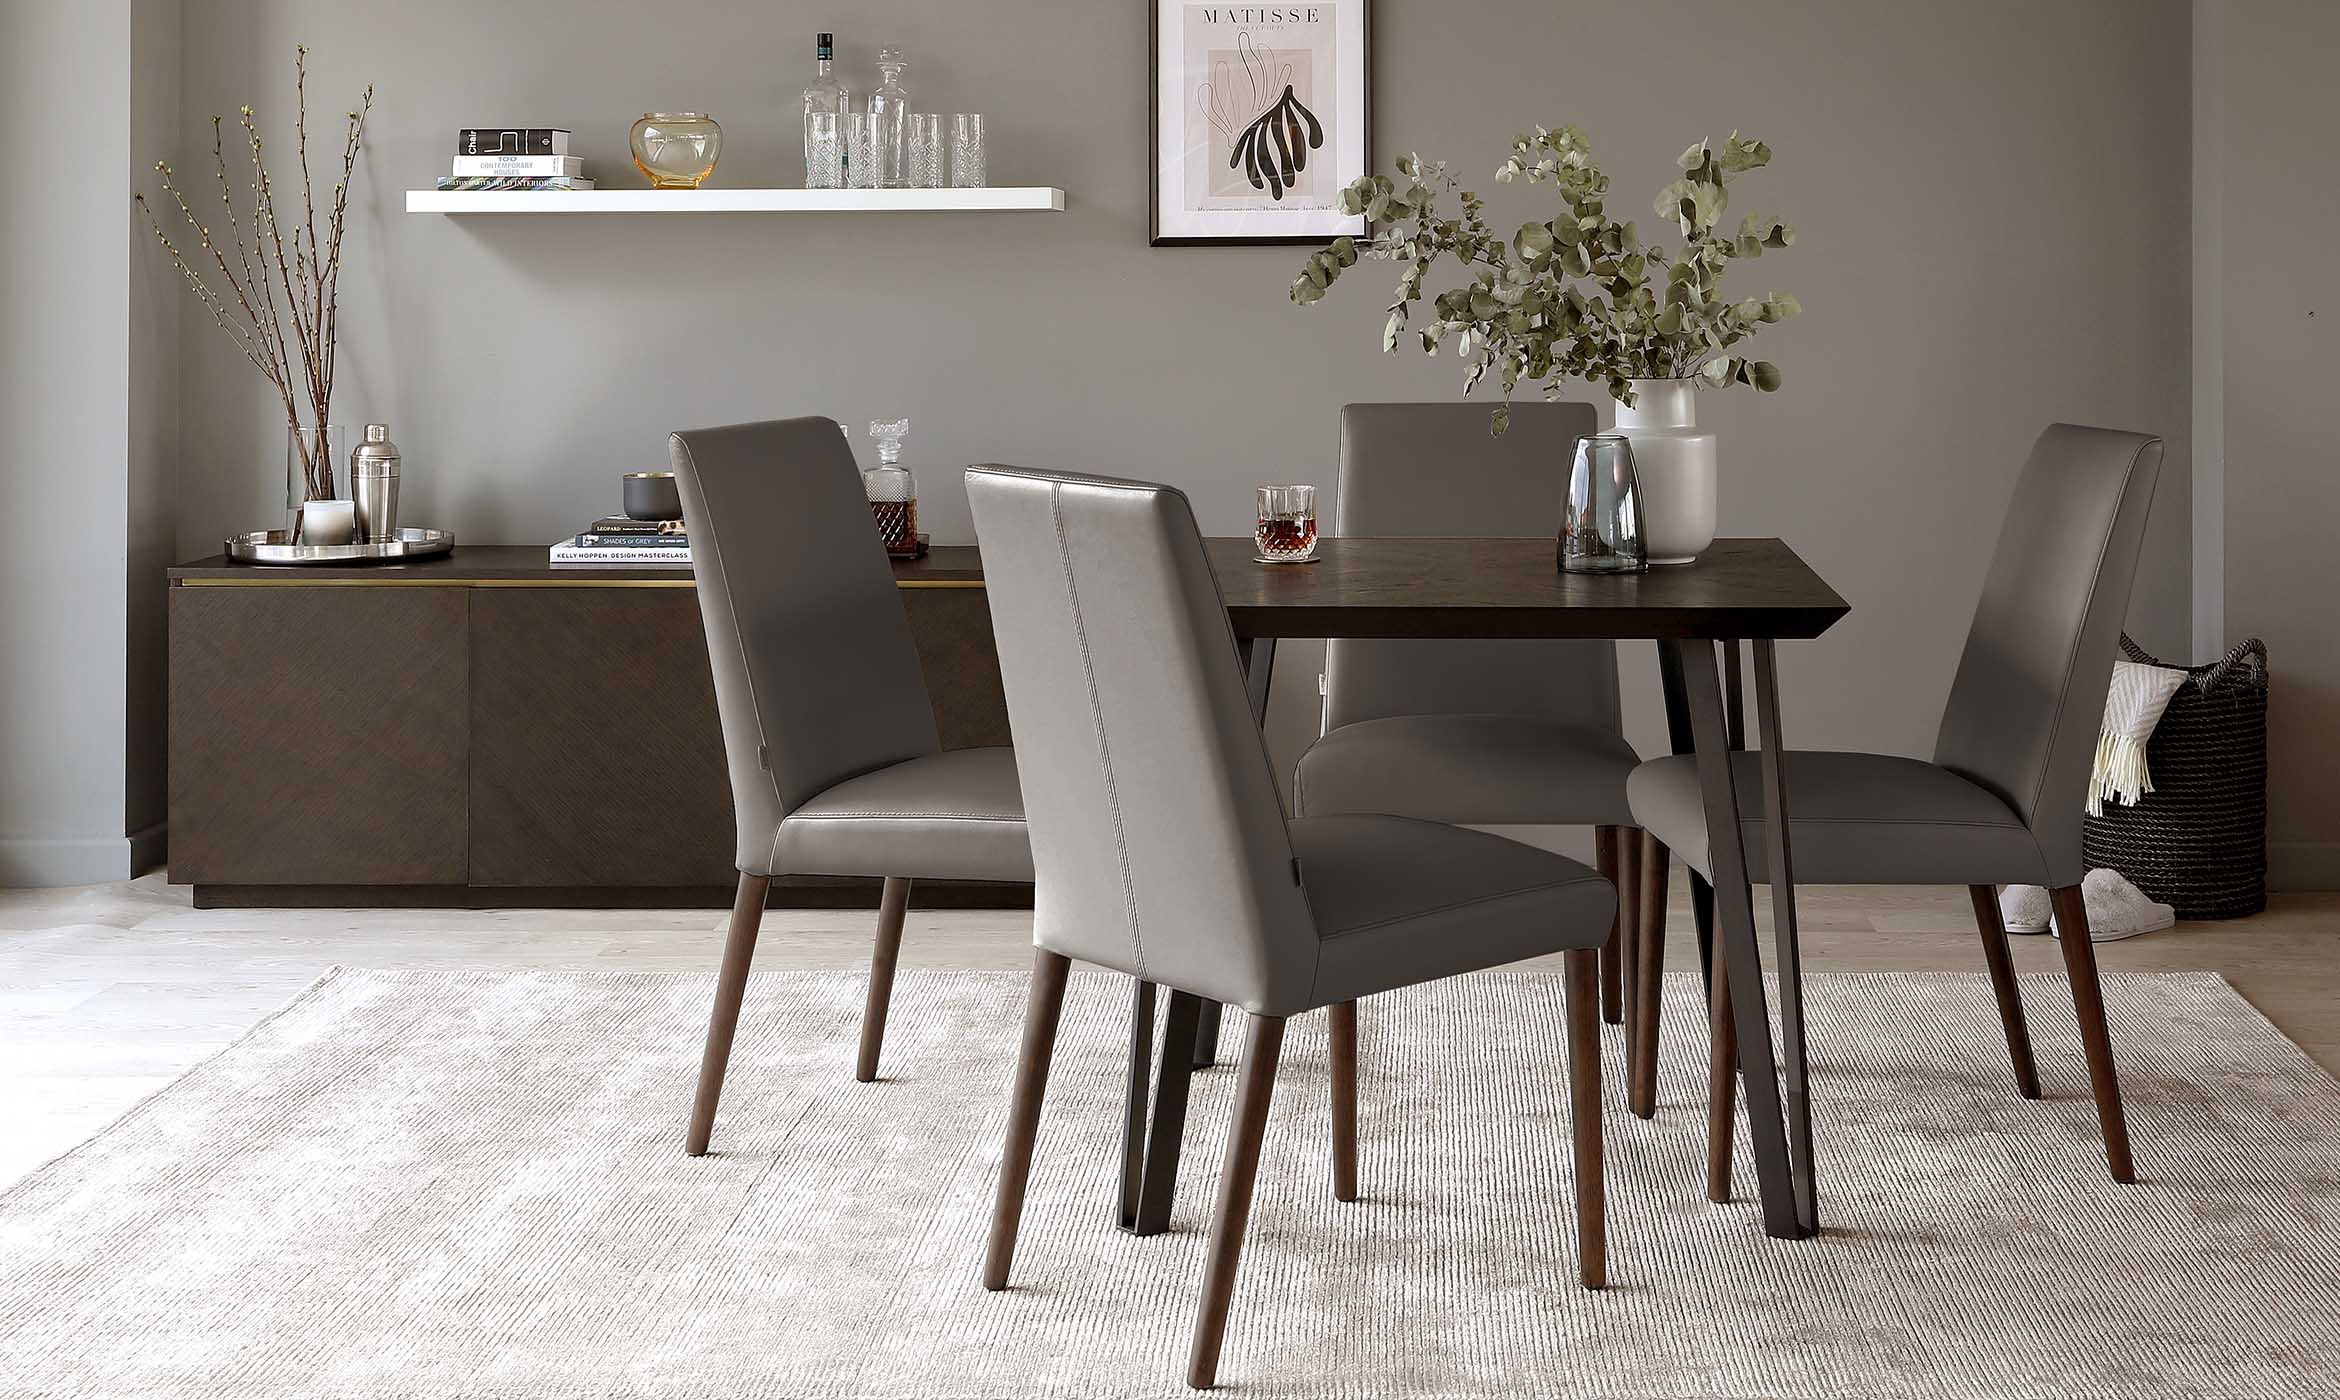 Take a Look at our New Range of Stylish, Contemporary Real Leather Dining Chairs